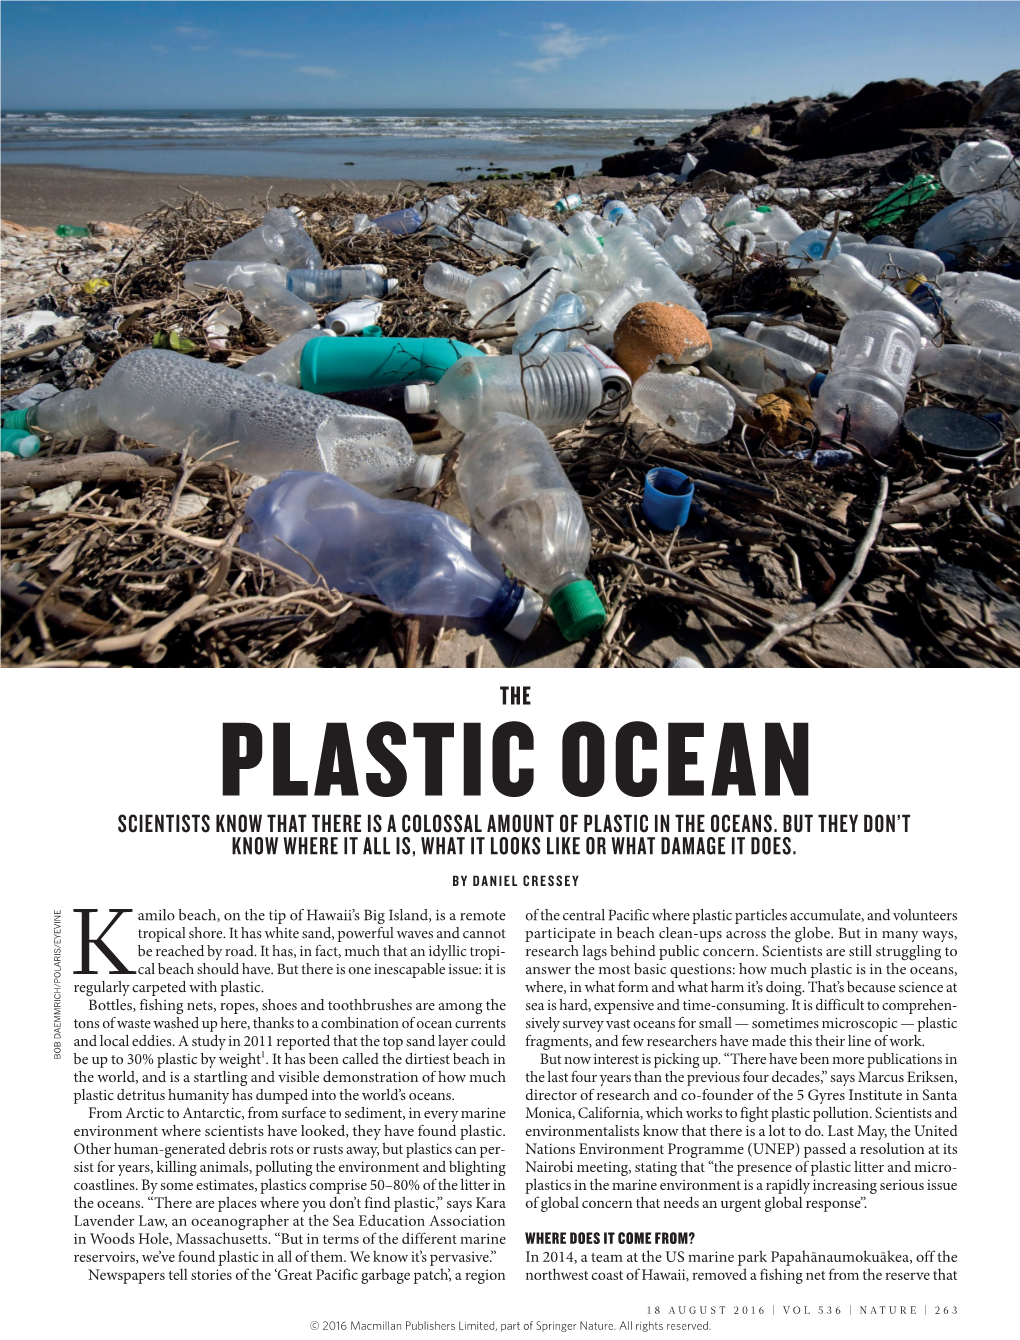 Plastic Ocean Scientists Know That There Is a Colossal Amount of Plastic in the Oceans